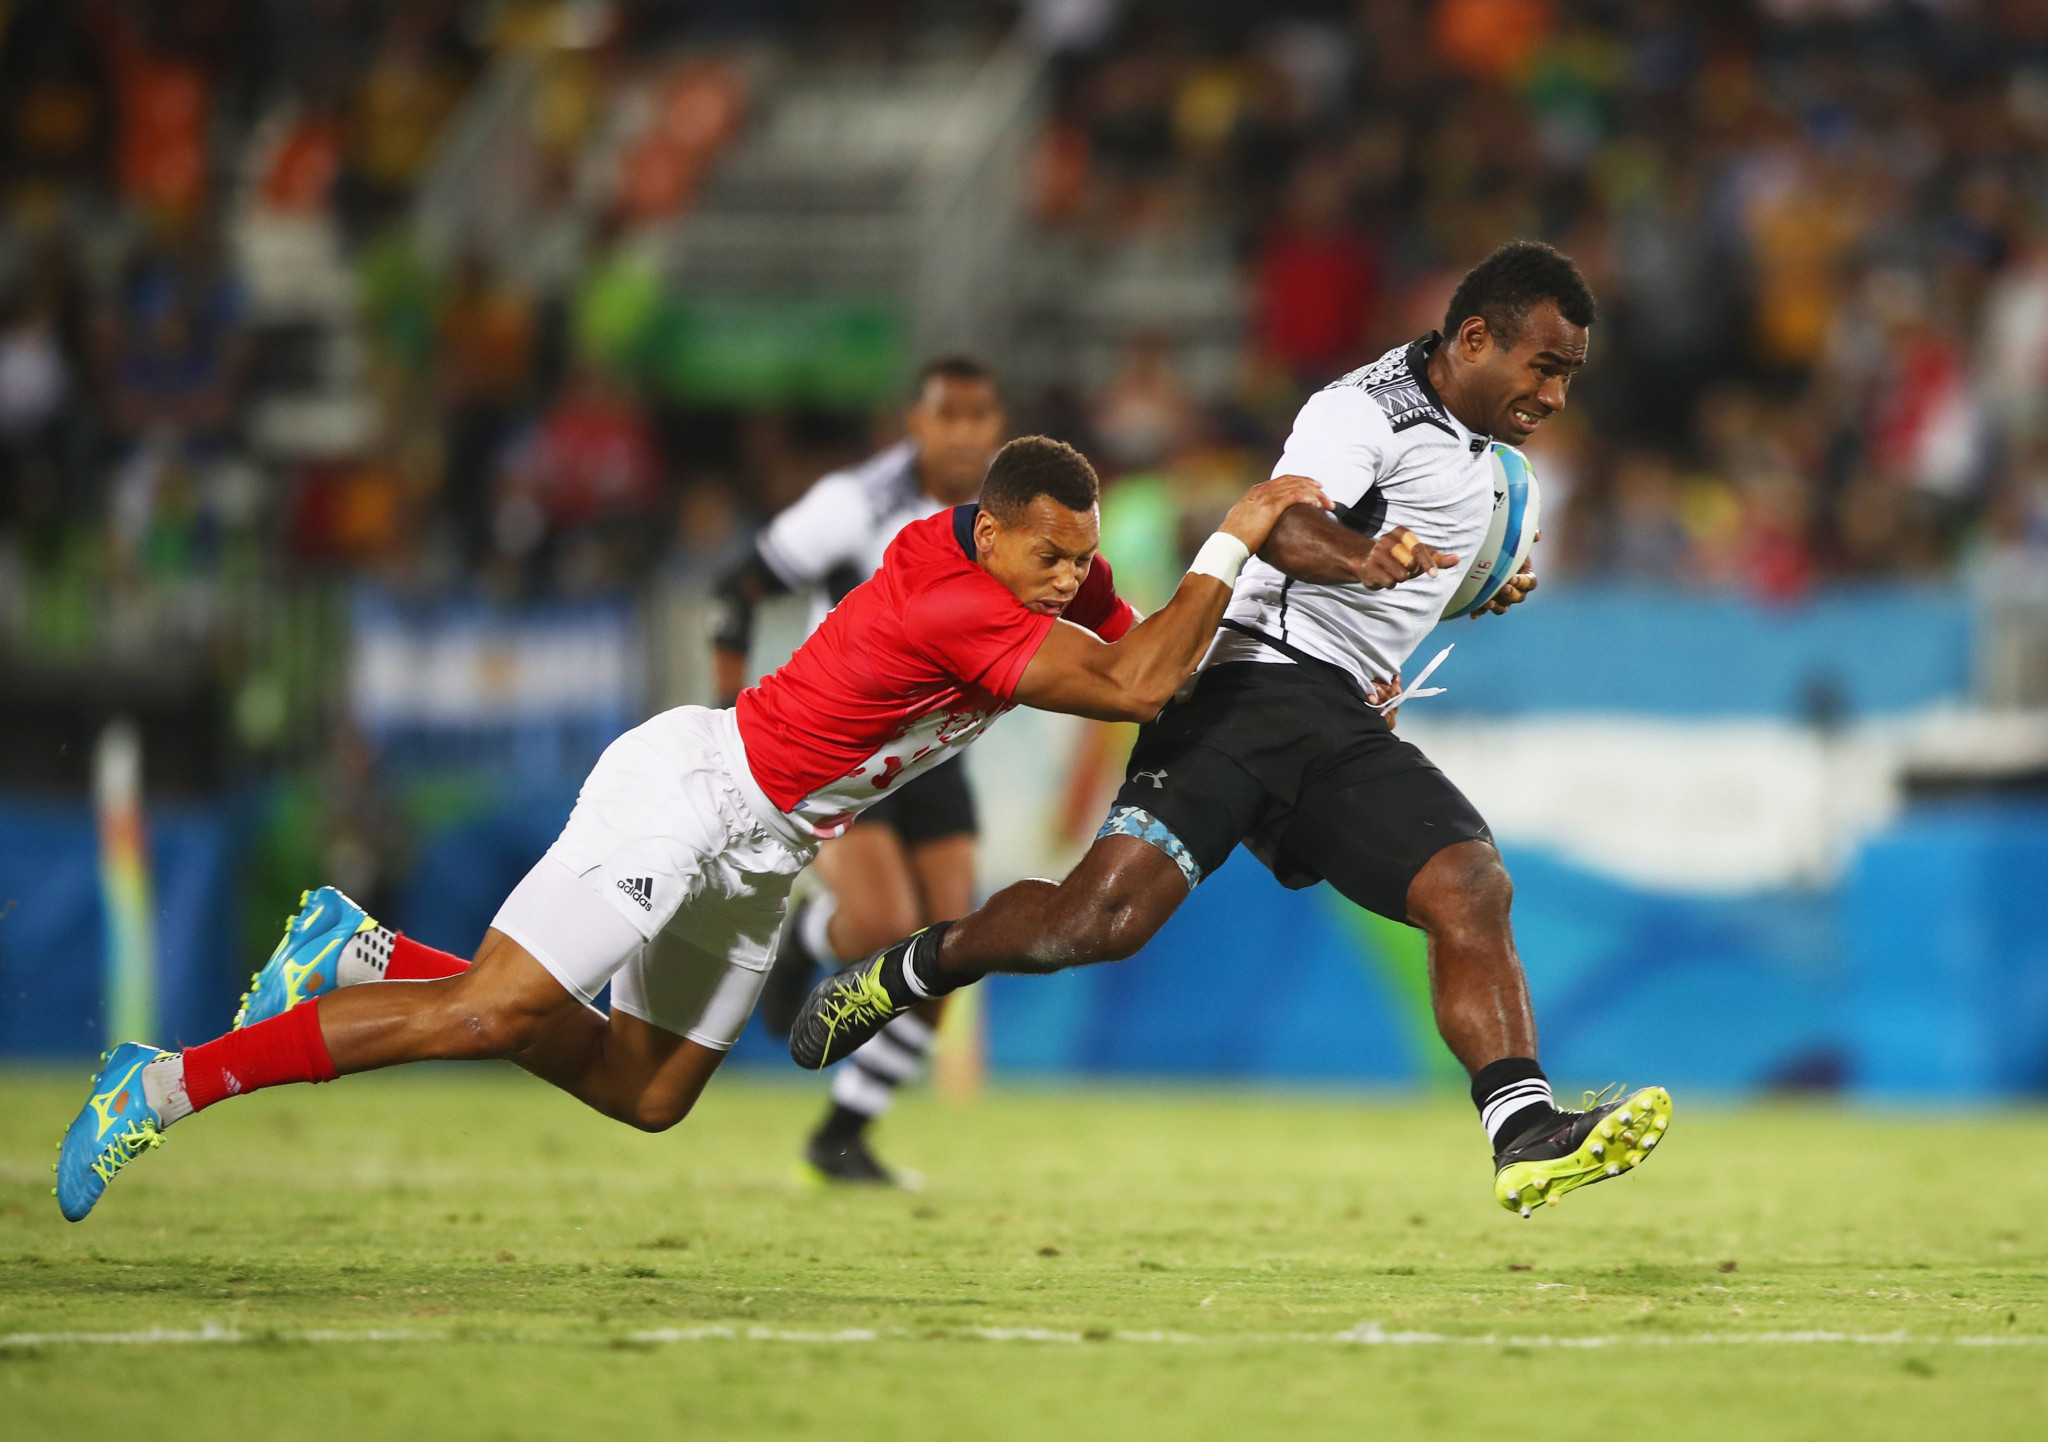 World Rugby and IOC confirm rugby sevens qualification process for Tokyo 2020